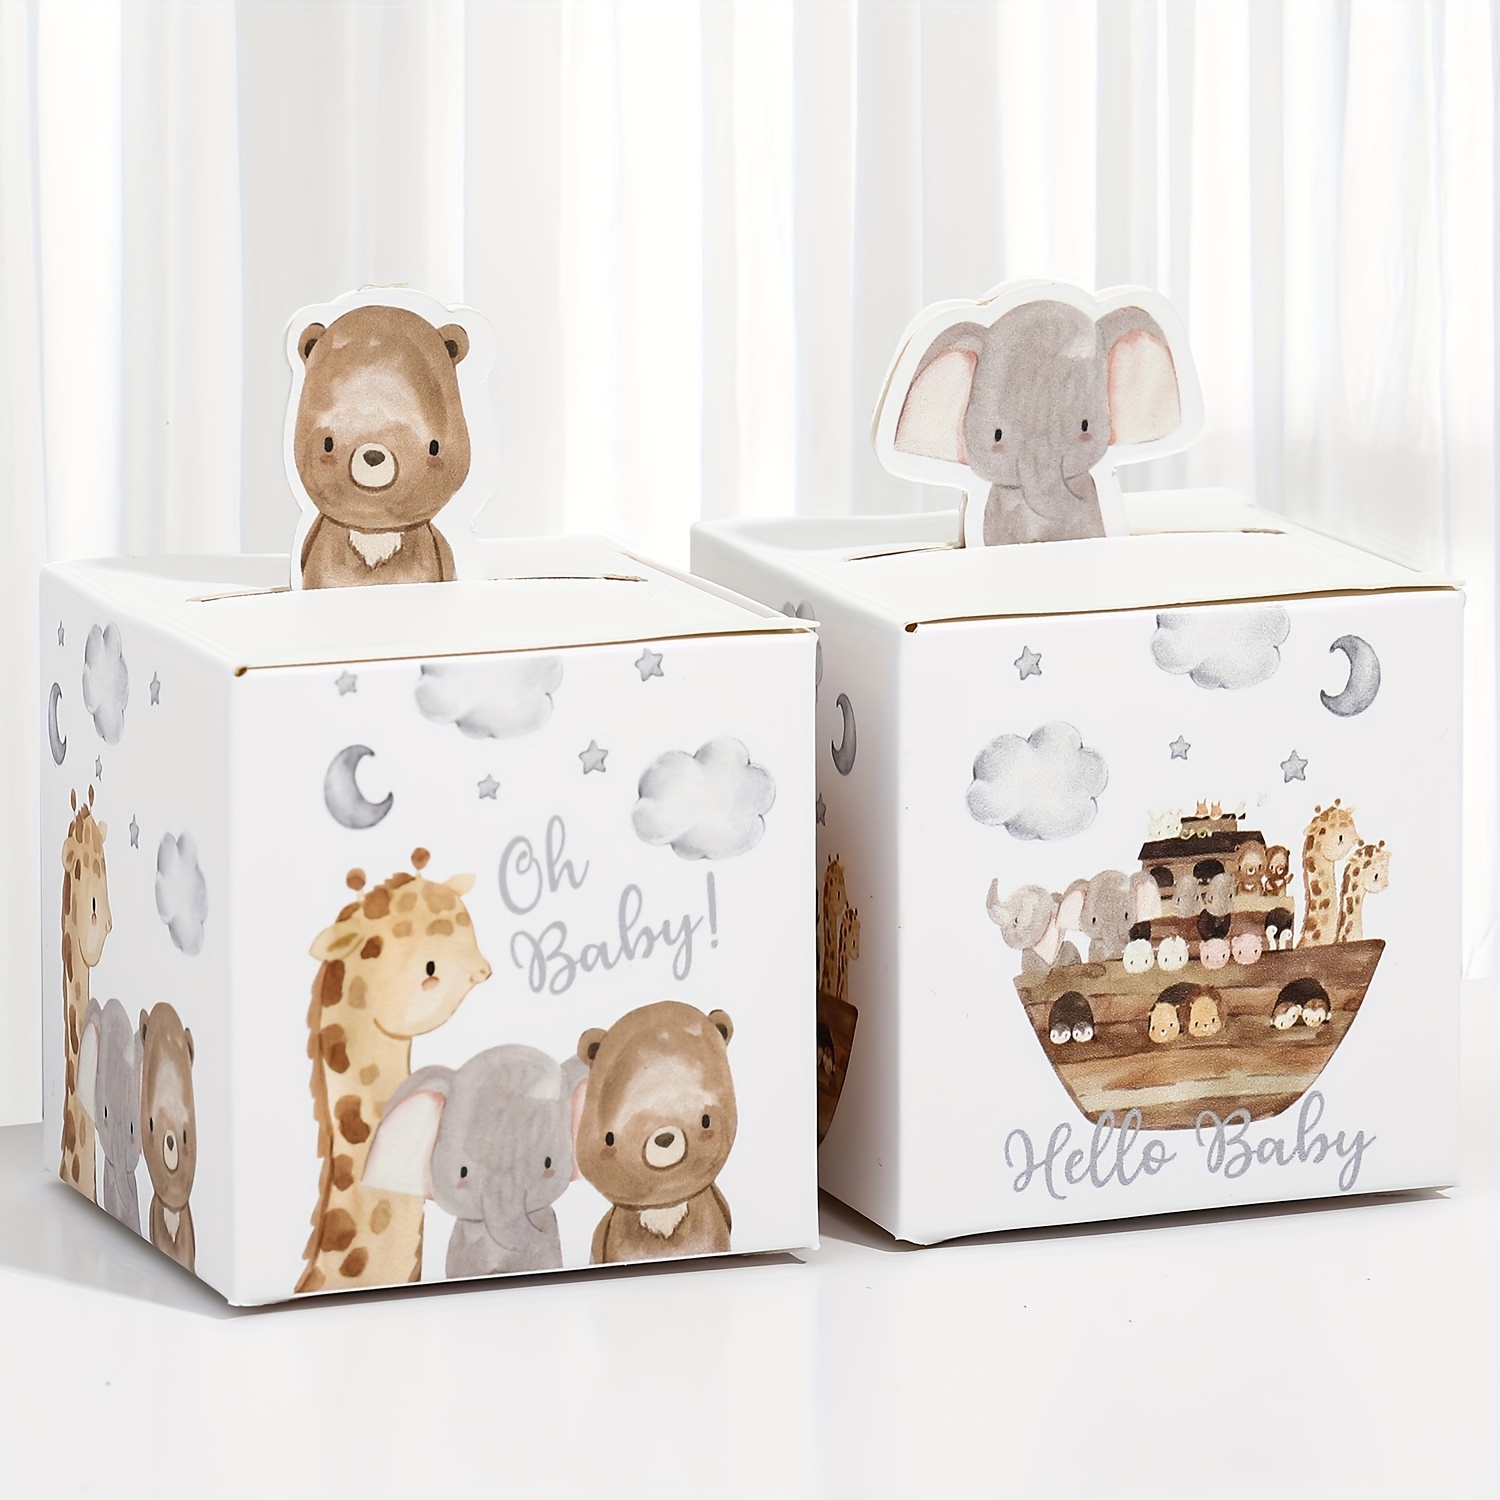 

25pcs, Cute Animal Elephant Giraffe Candy Boxes Baby Shower Party Gift Packaging Boxes Birthday Party Gift Packaging Boxes Party Favors Birthday Party Decoration Party Suppliers